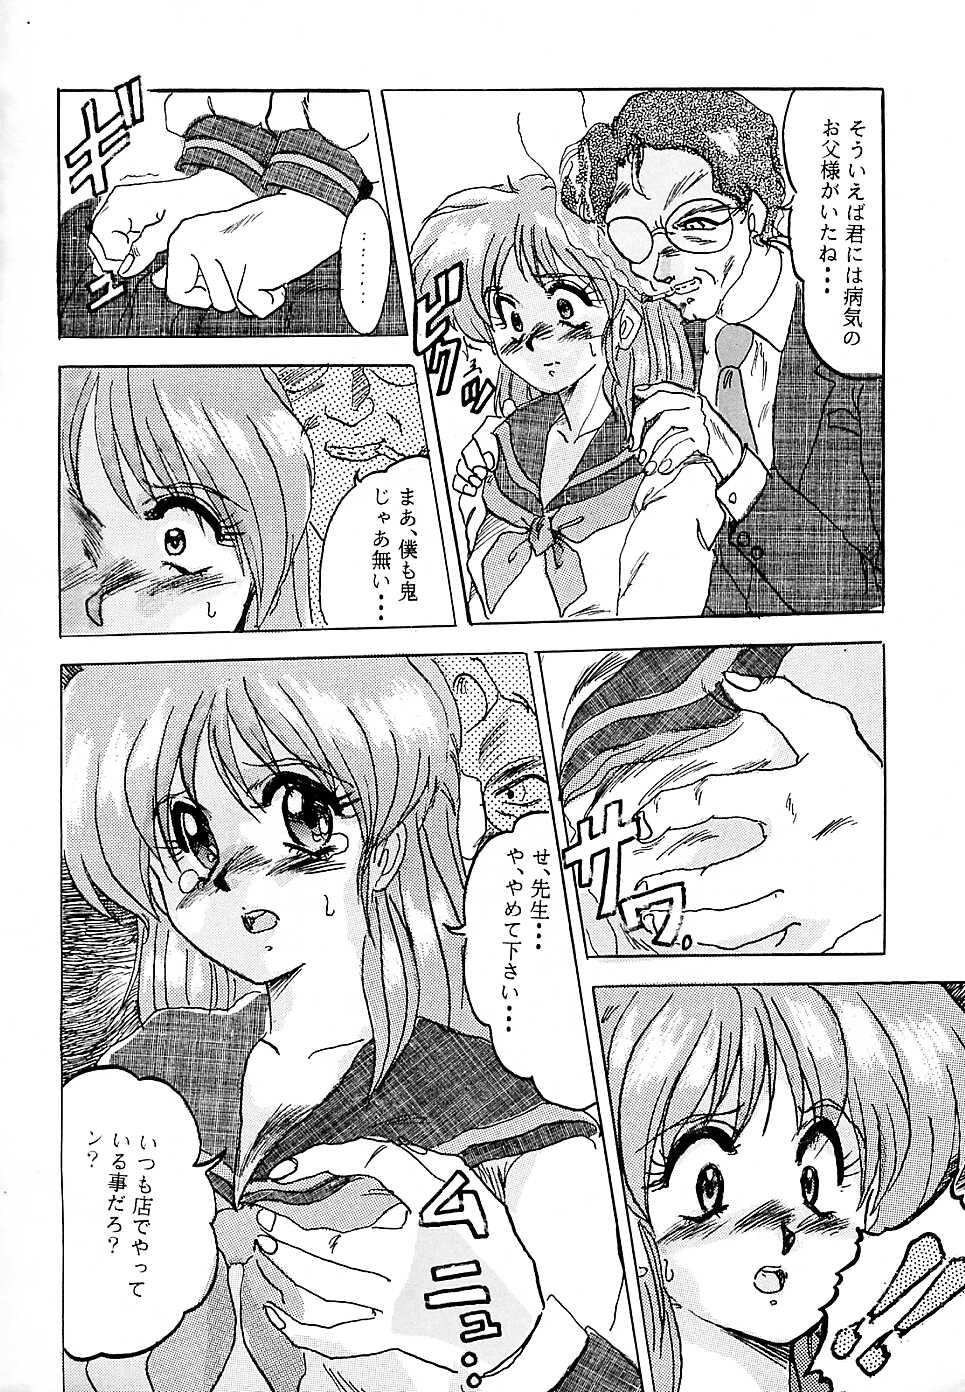 Curves F 93C - Brave express might gaine Heels - Page 5